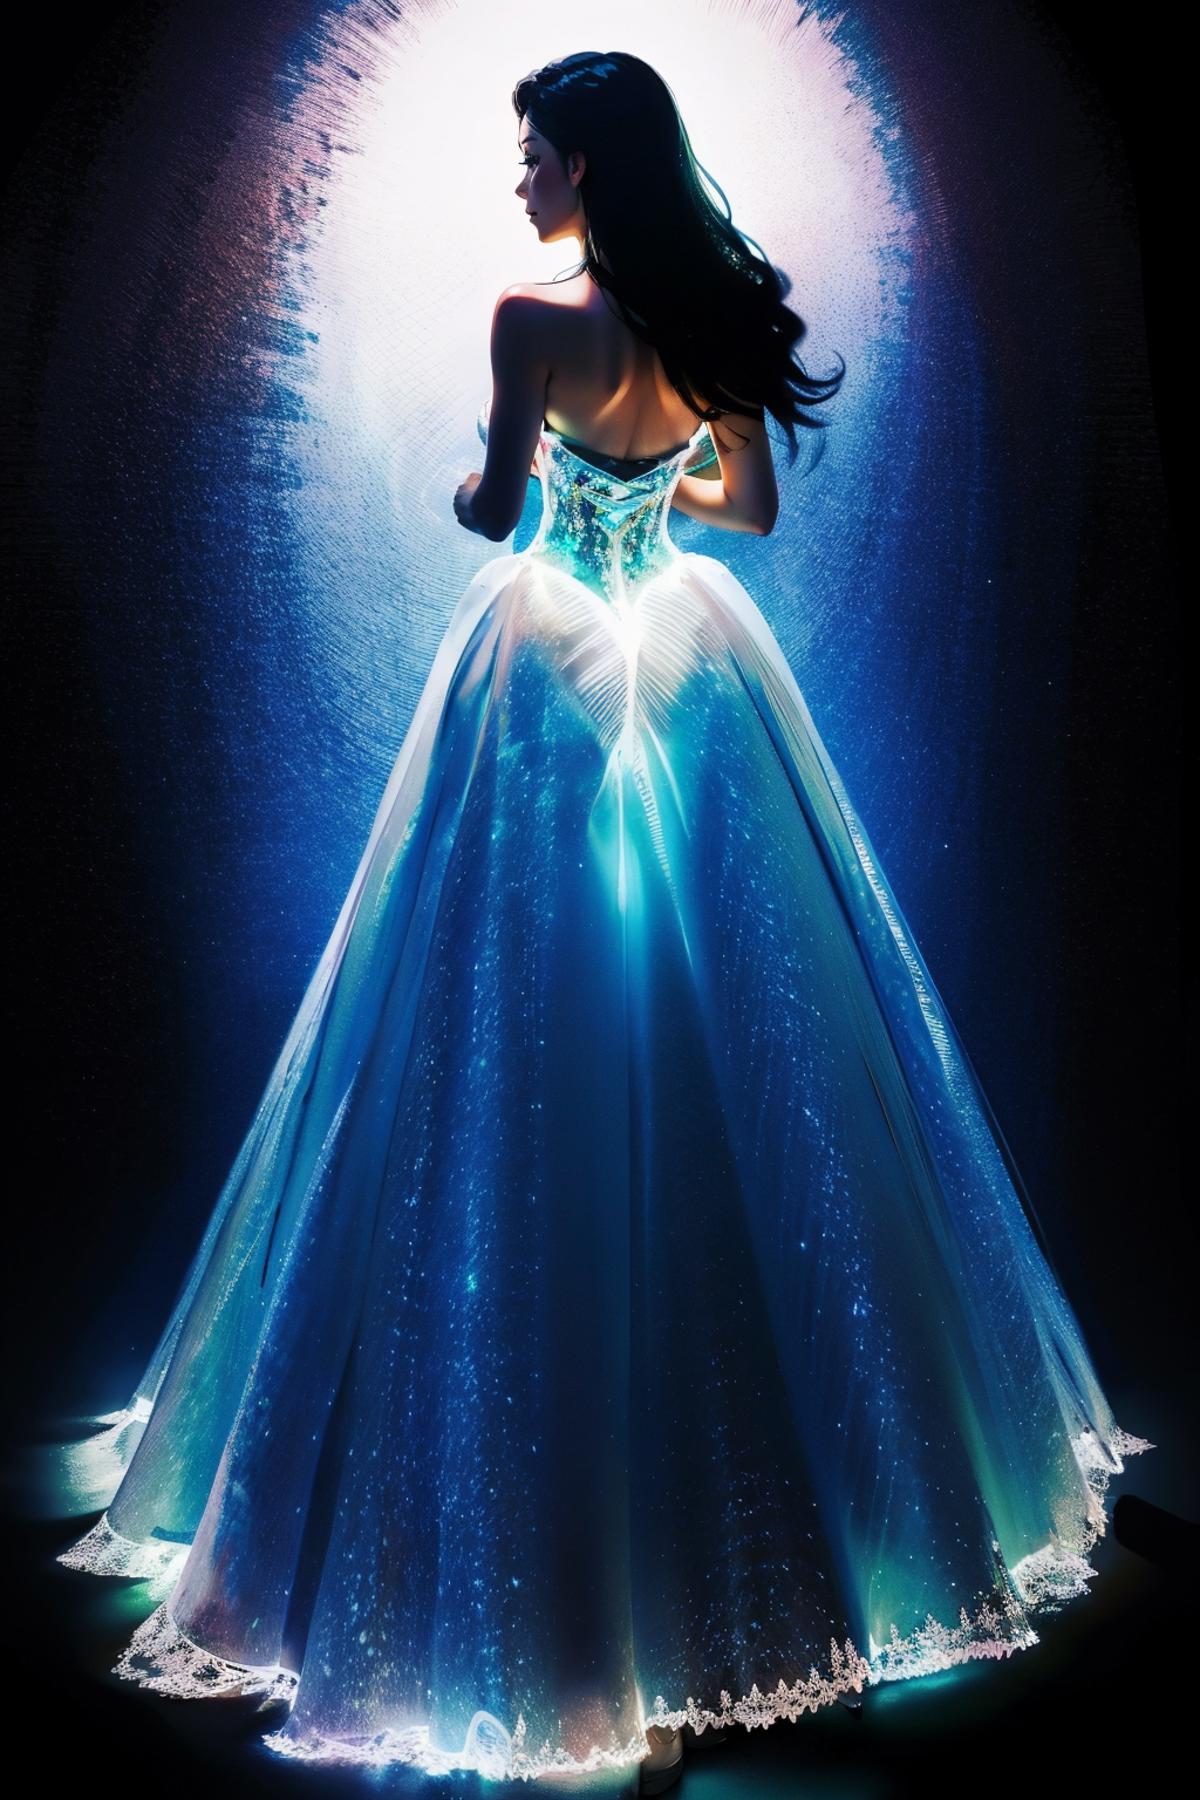 Glowing Gowns image by freckledvixon